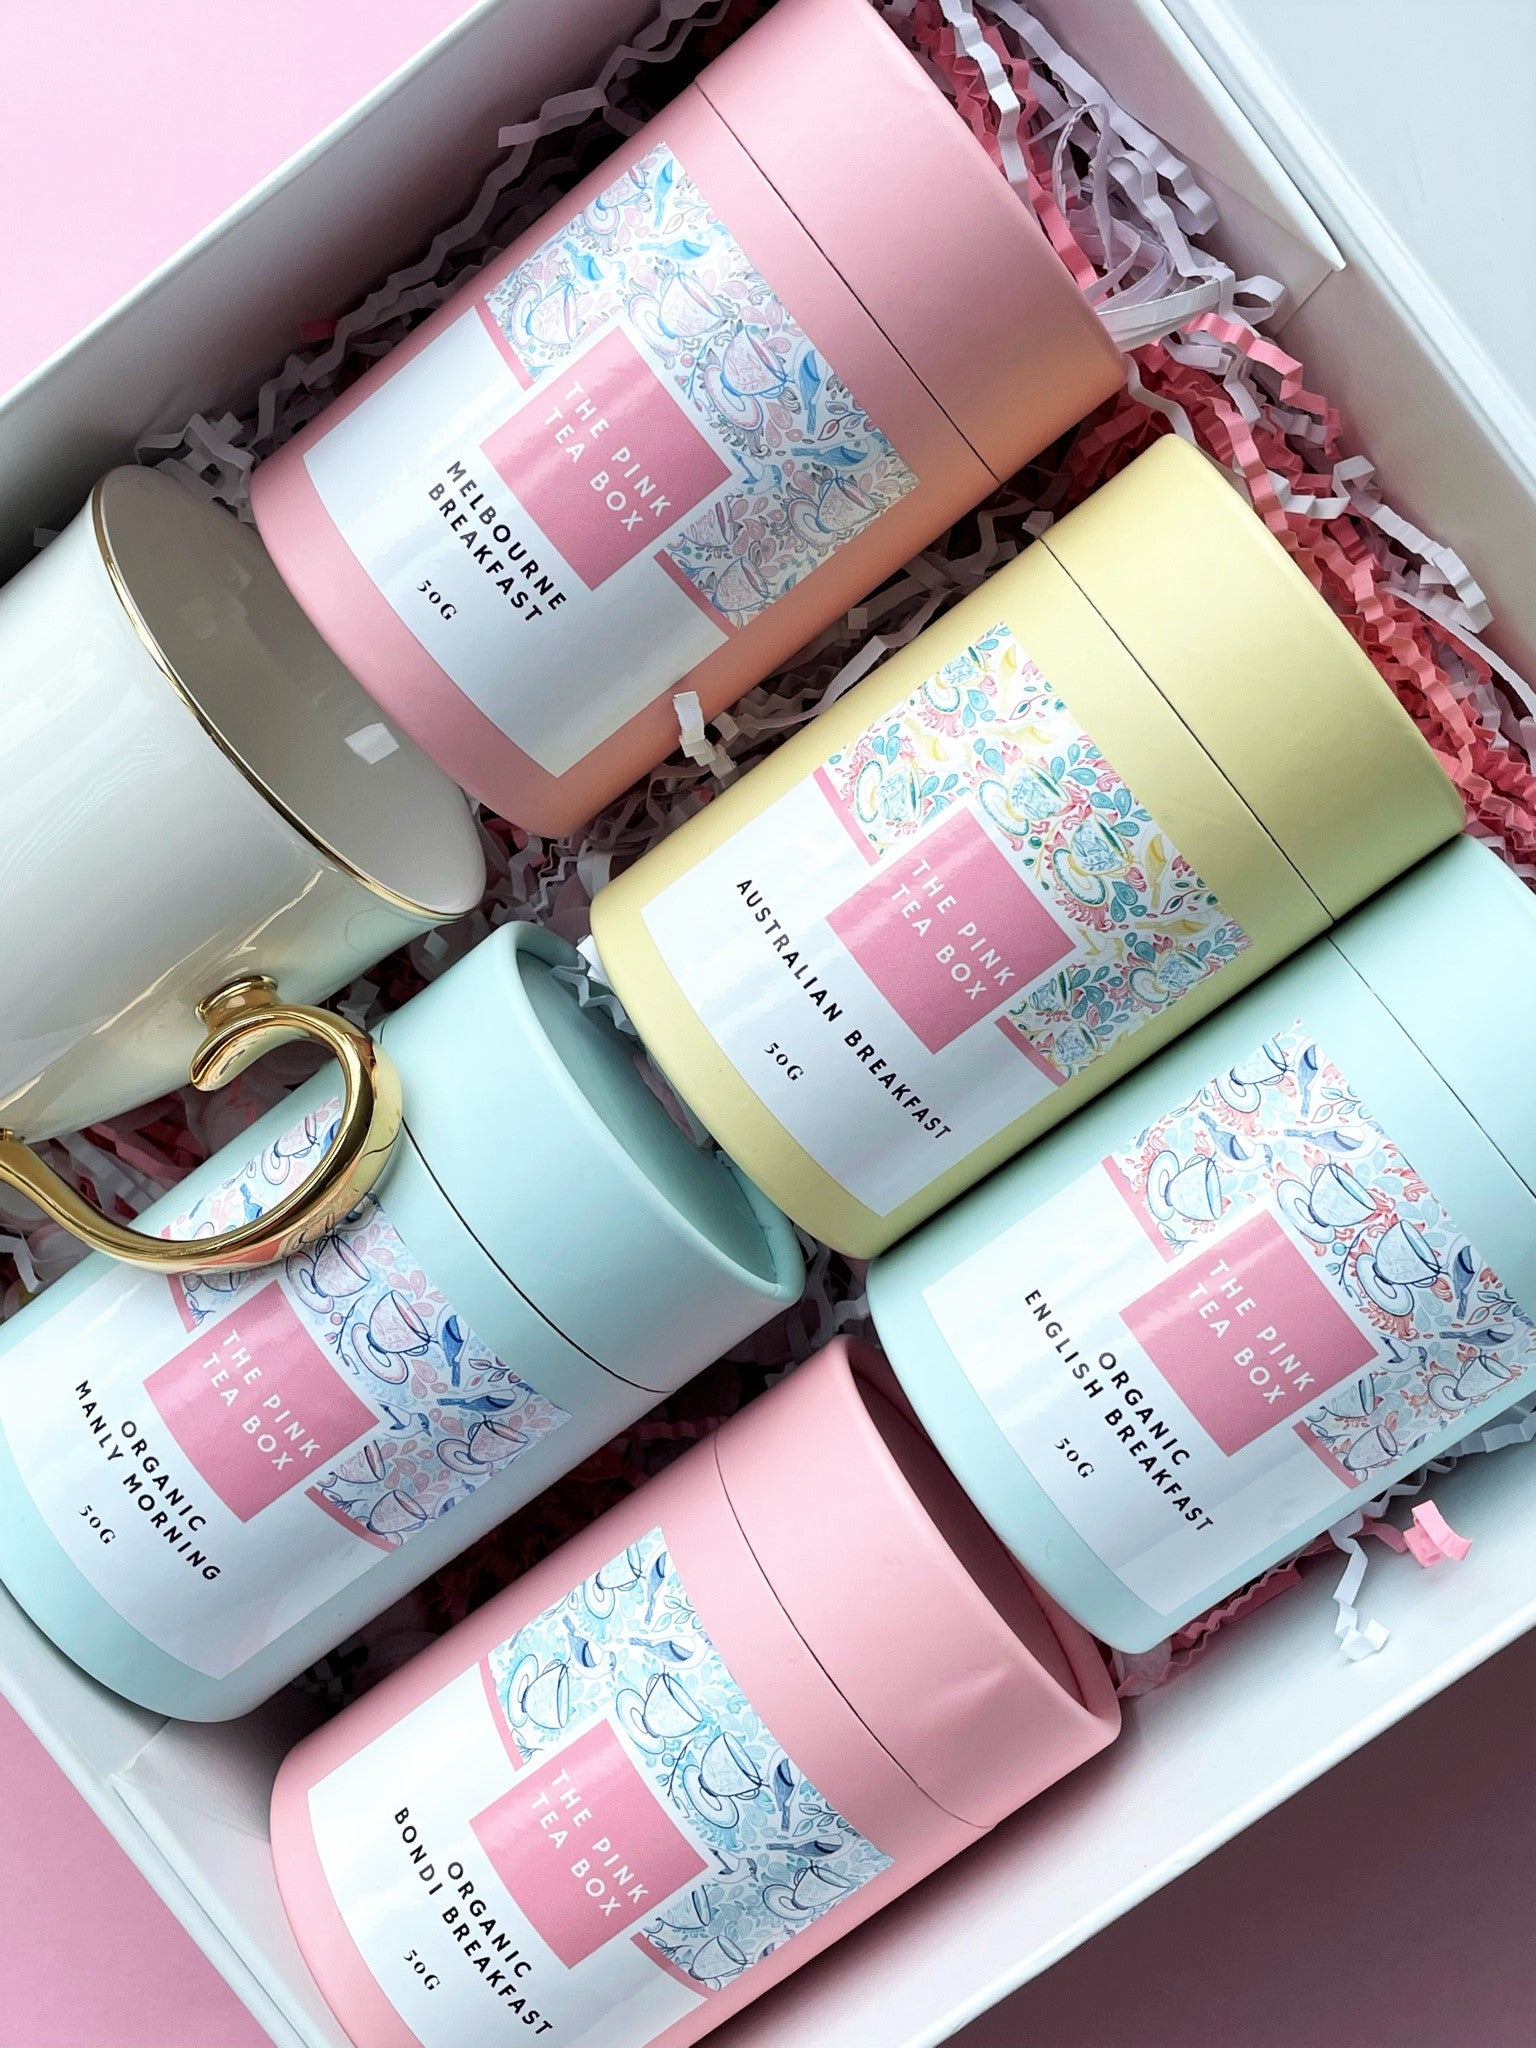 Selection of pretty tea canisters containing various teas from the pink tea box